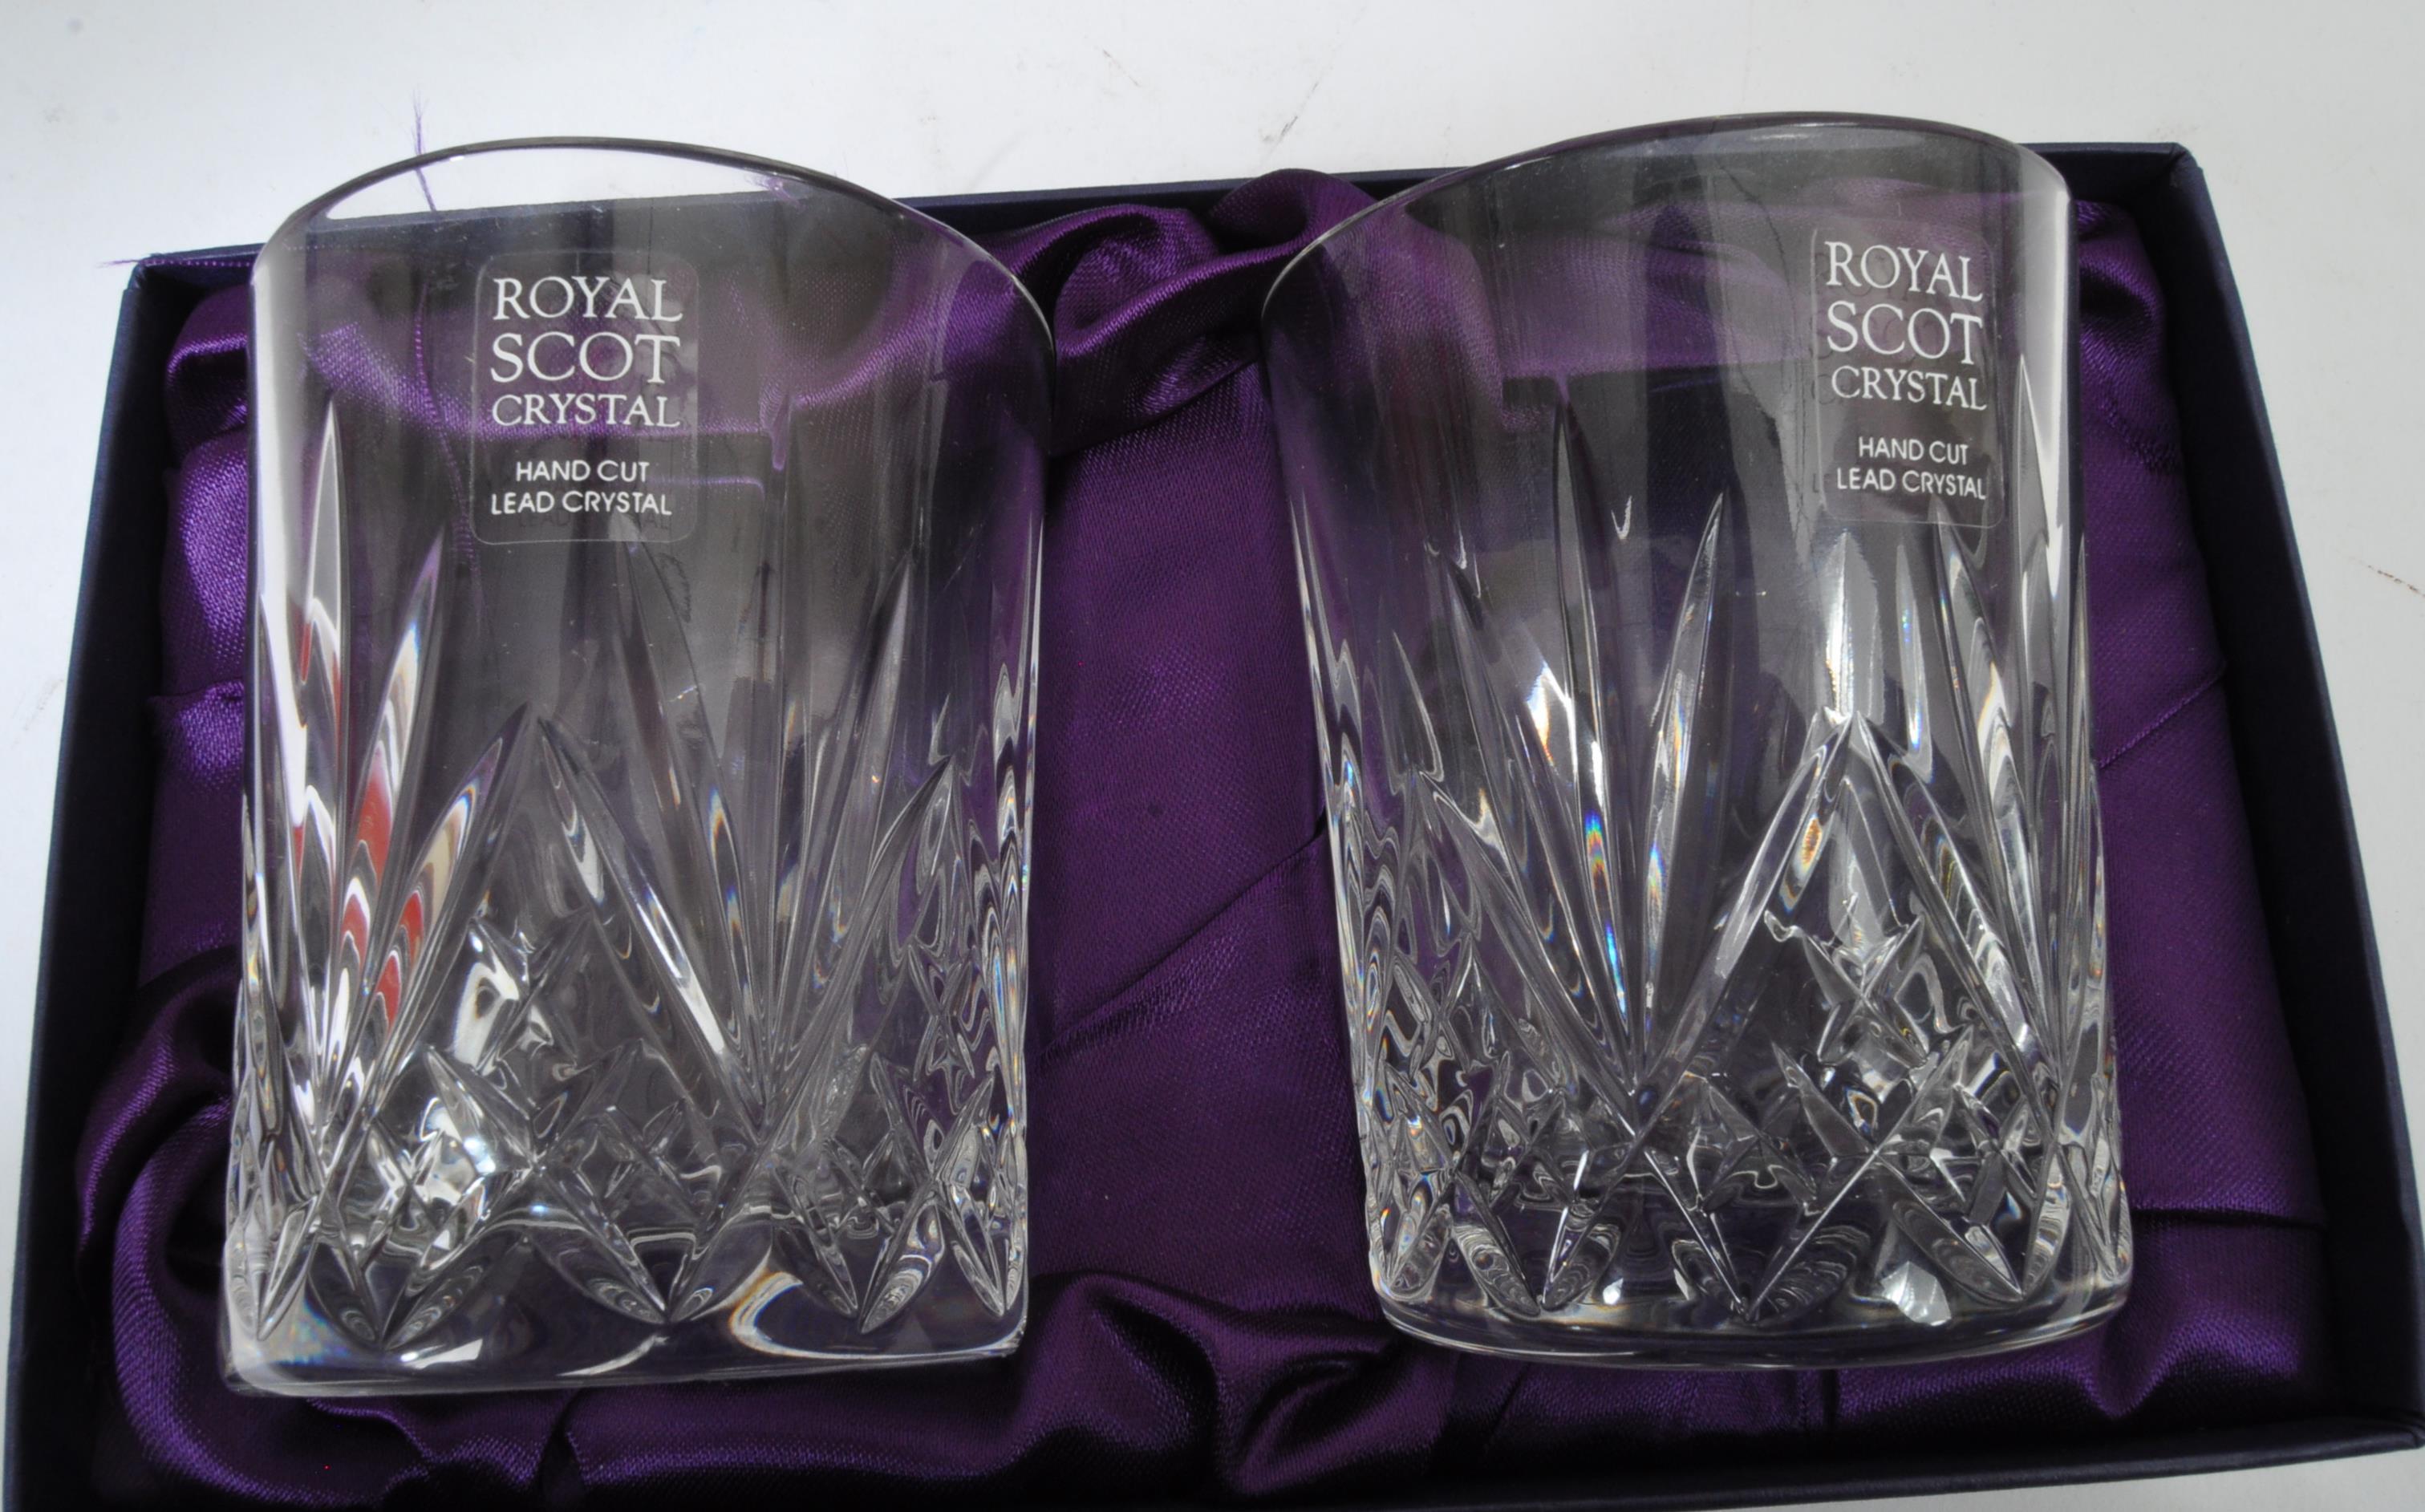 NOS ROYAL SCOT CRYSTAL HAND CUT DRINKING GLASSES - Image 3 of 5